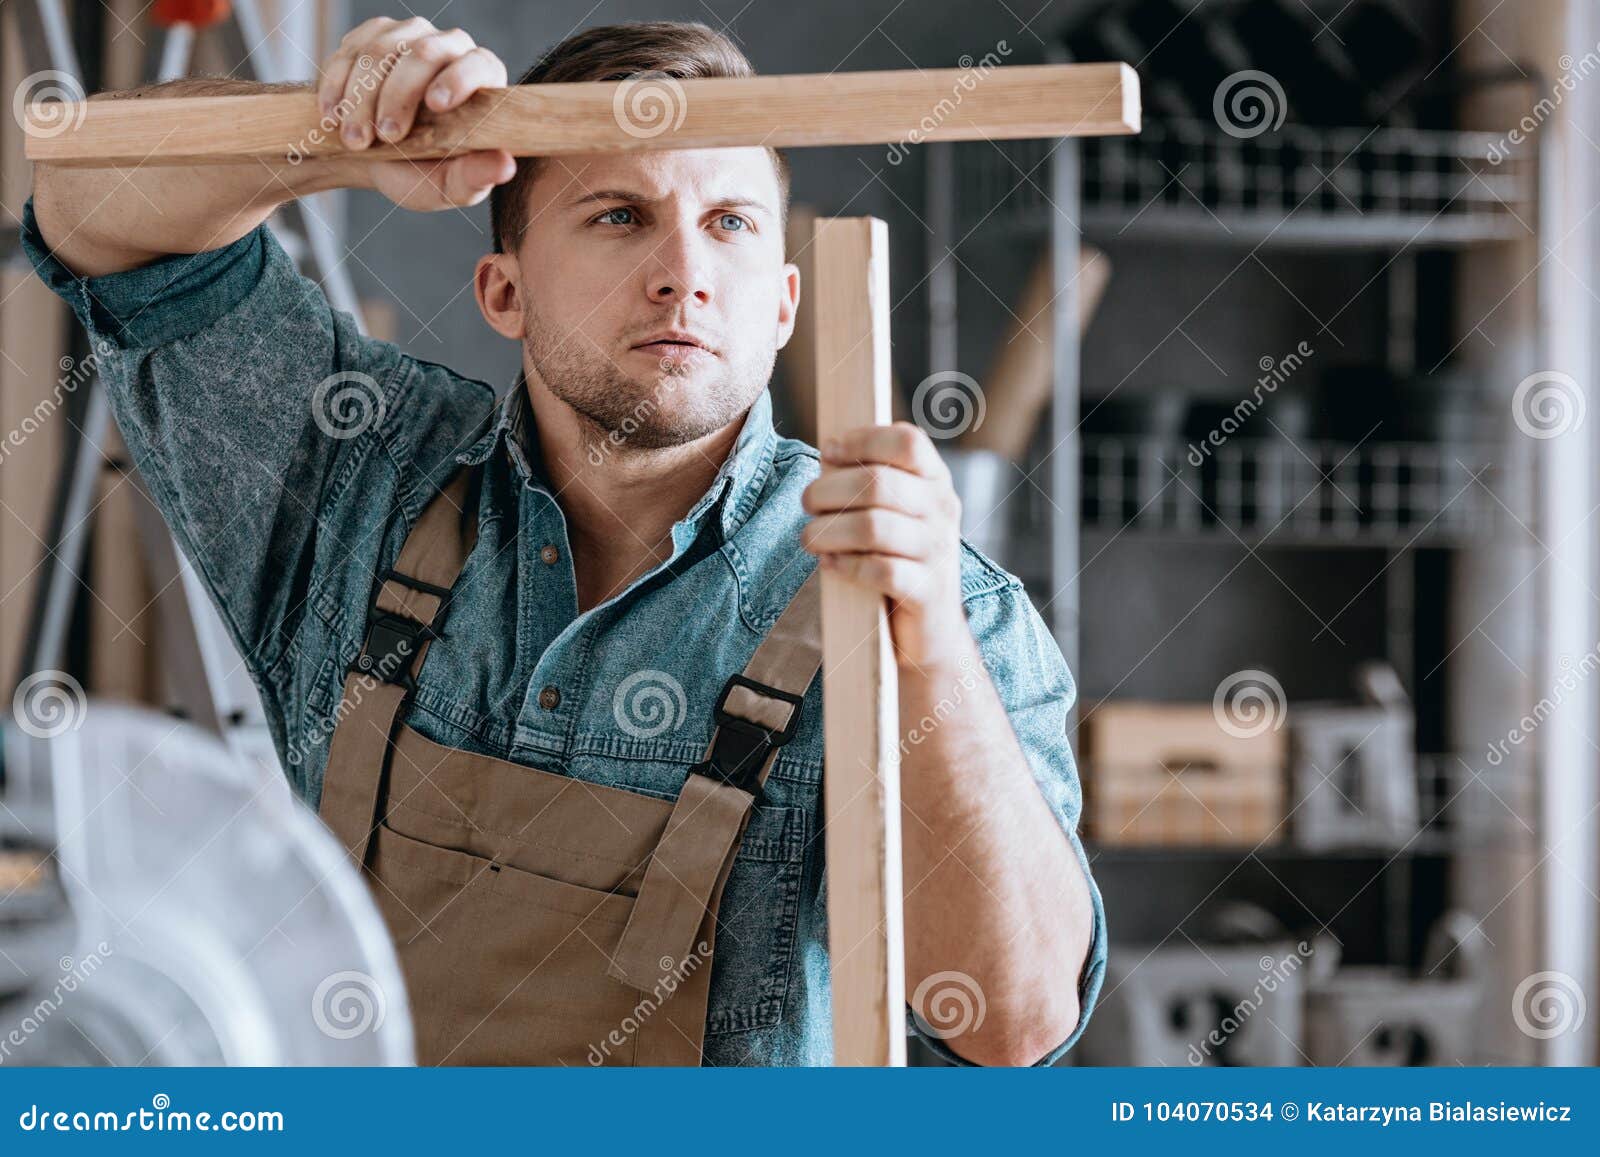 concentrated carpenter matching wooden parts